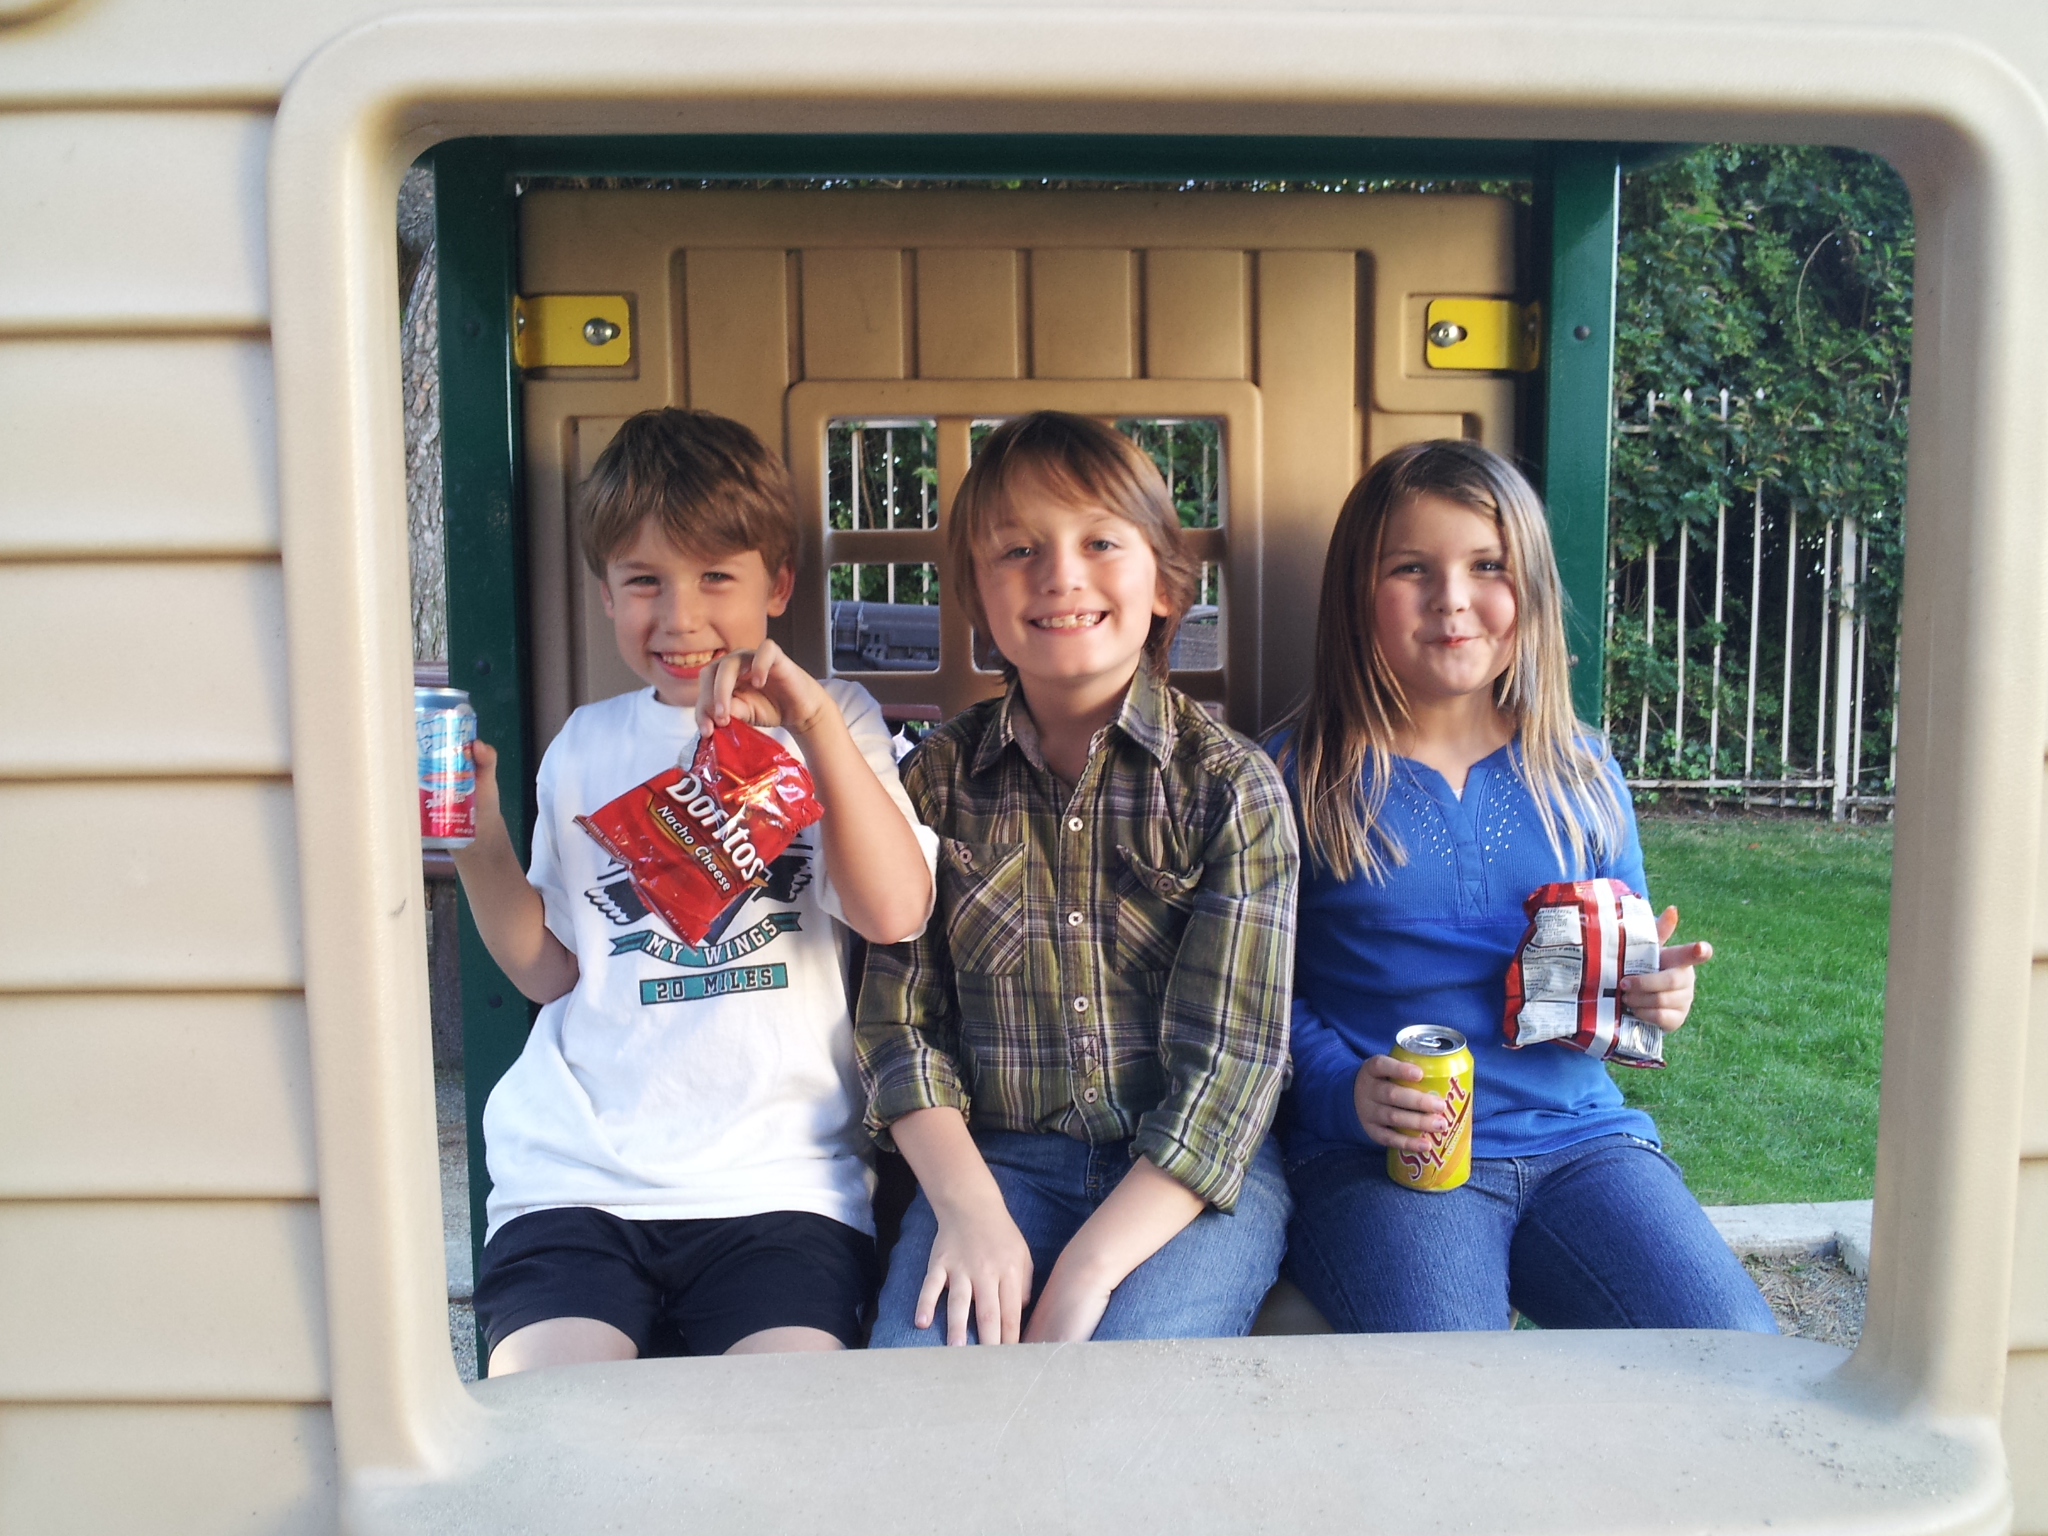 Isabella Sierra Kelly, Tillman Norsworthy and Zackary Haven - The Percipient - On Set Taking A Break